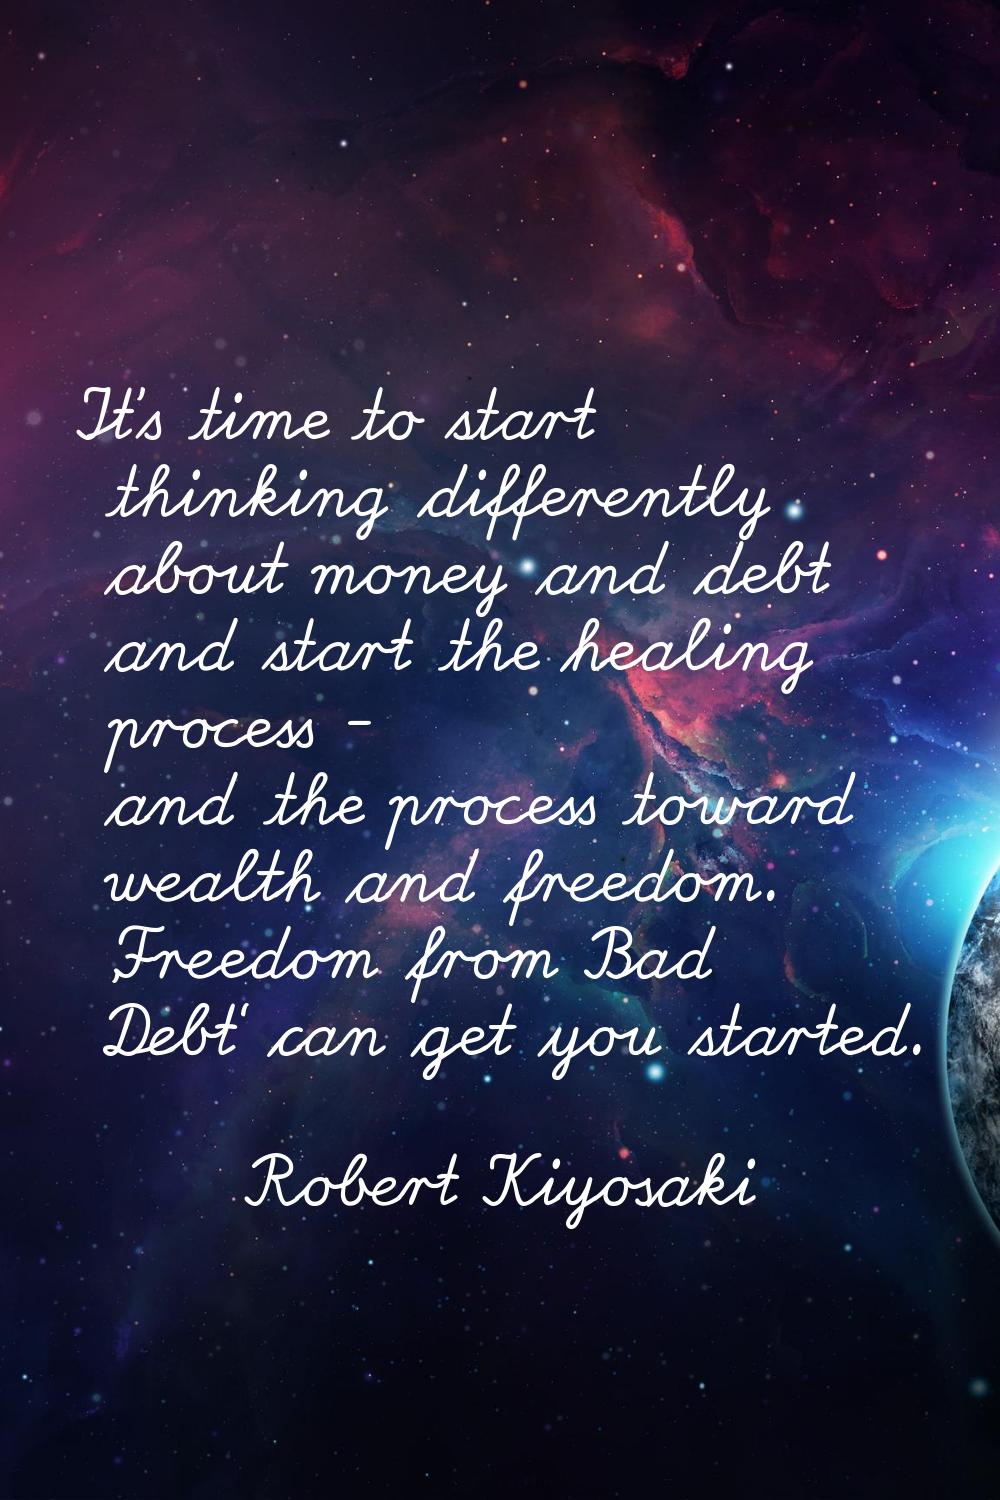 It's time to start thinking differently about money and debt and start the healing process - and th